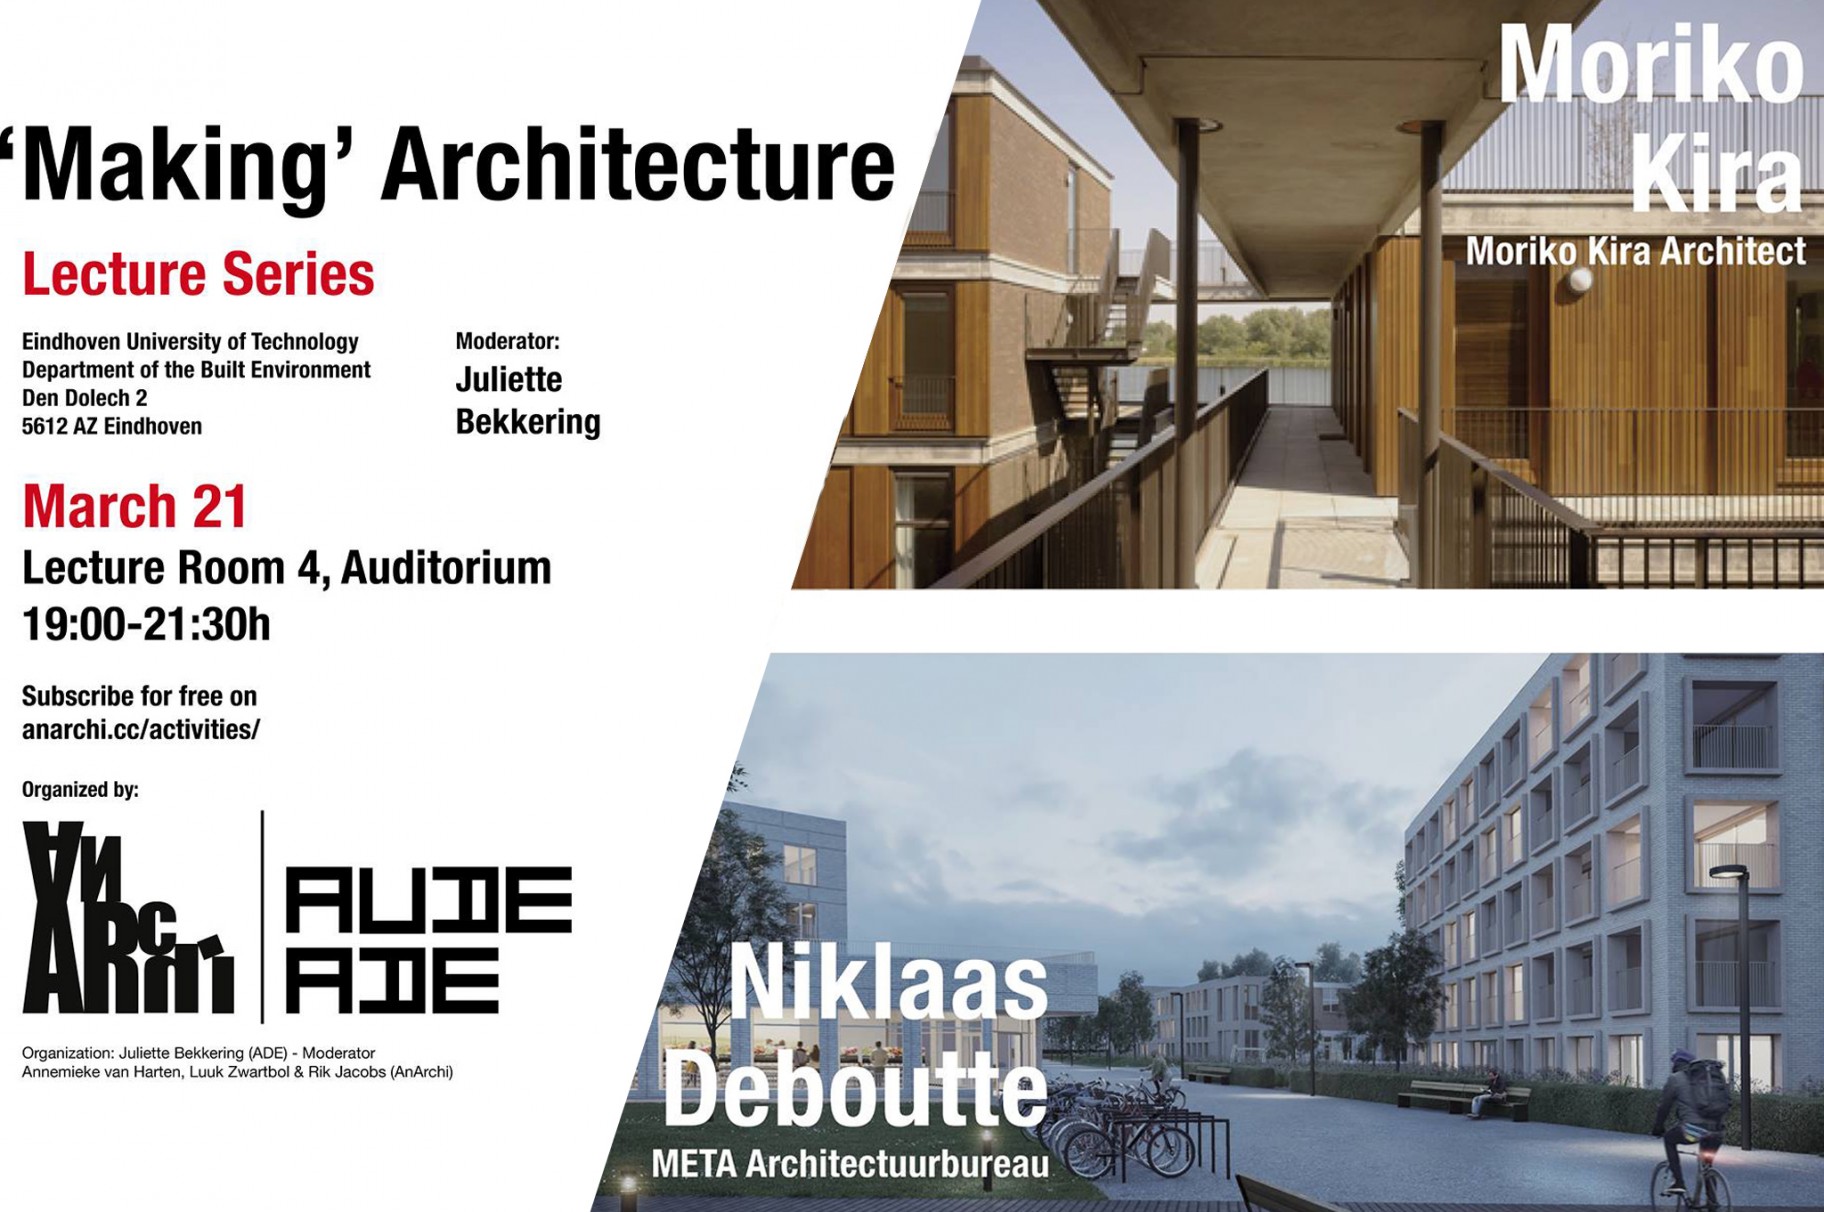 Niklaas Deboutte gives lecture 'Making Architecture' at TU Eindhoven